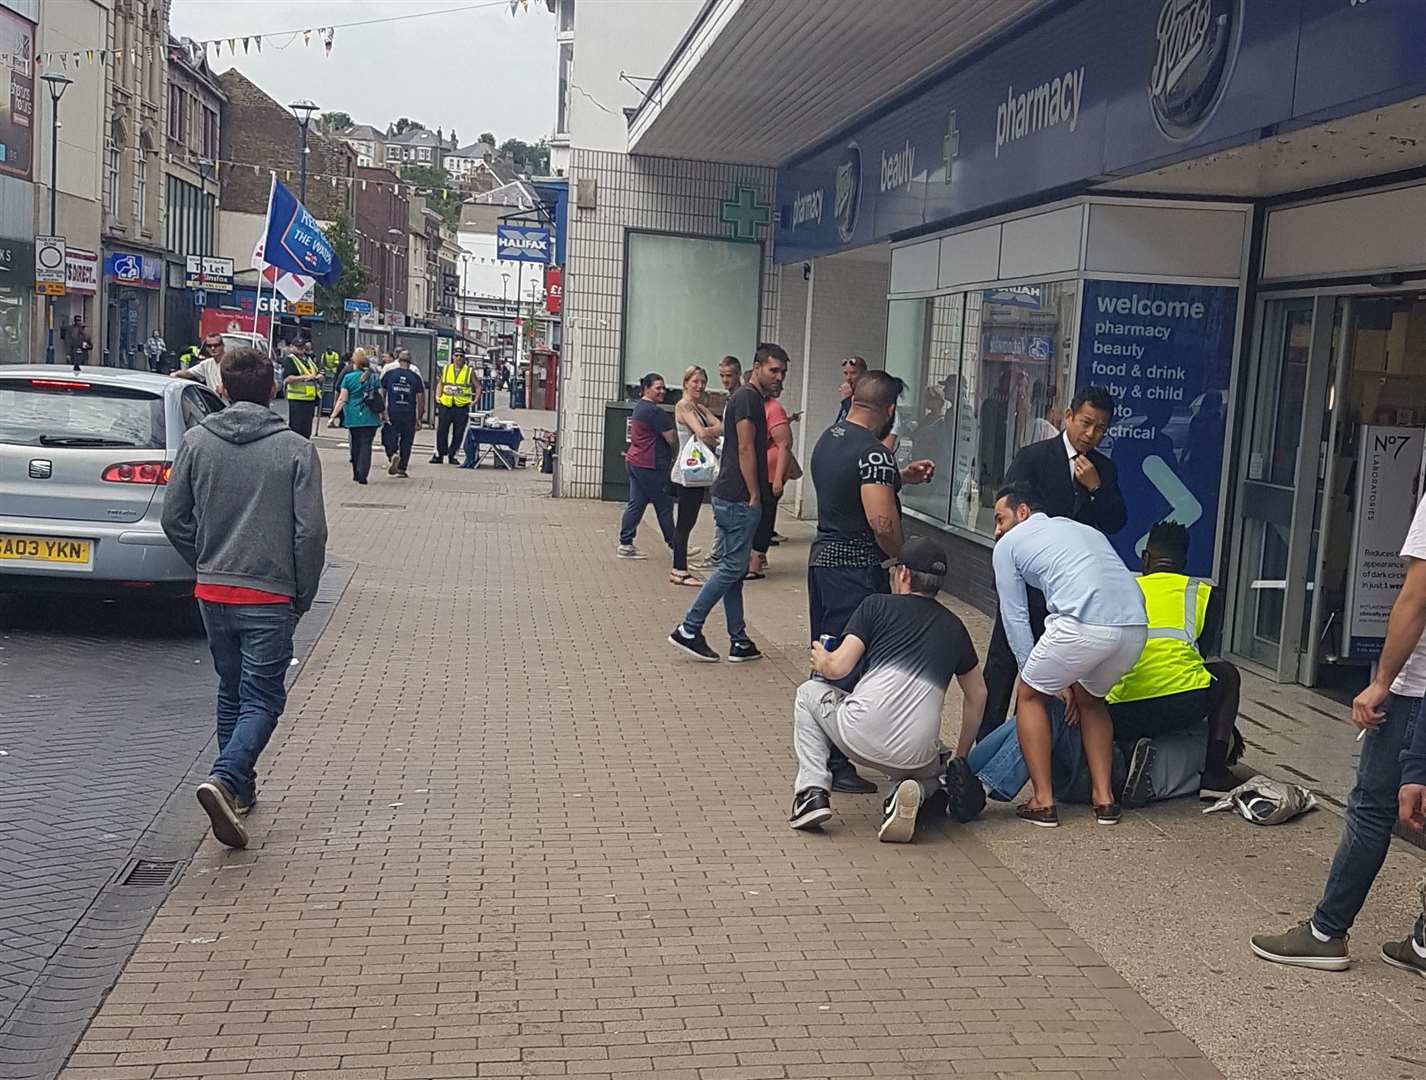 A man is restrained on the ground in Dover High Street